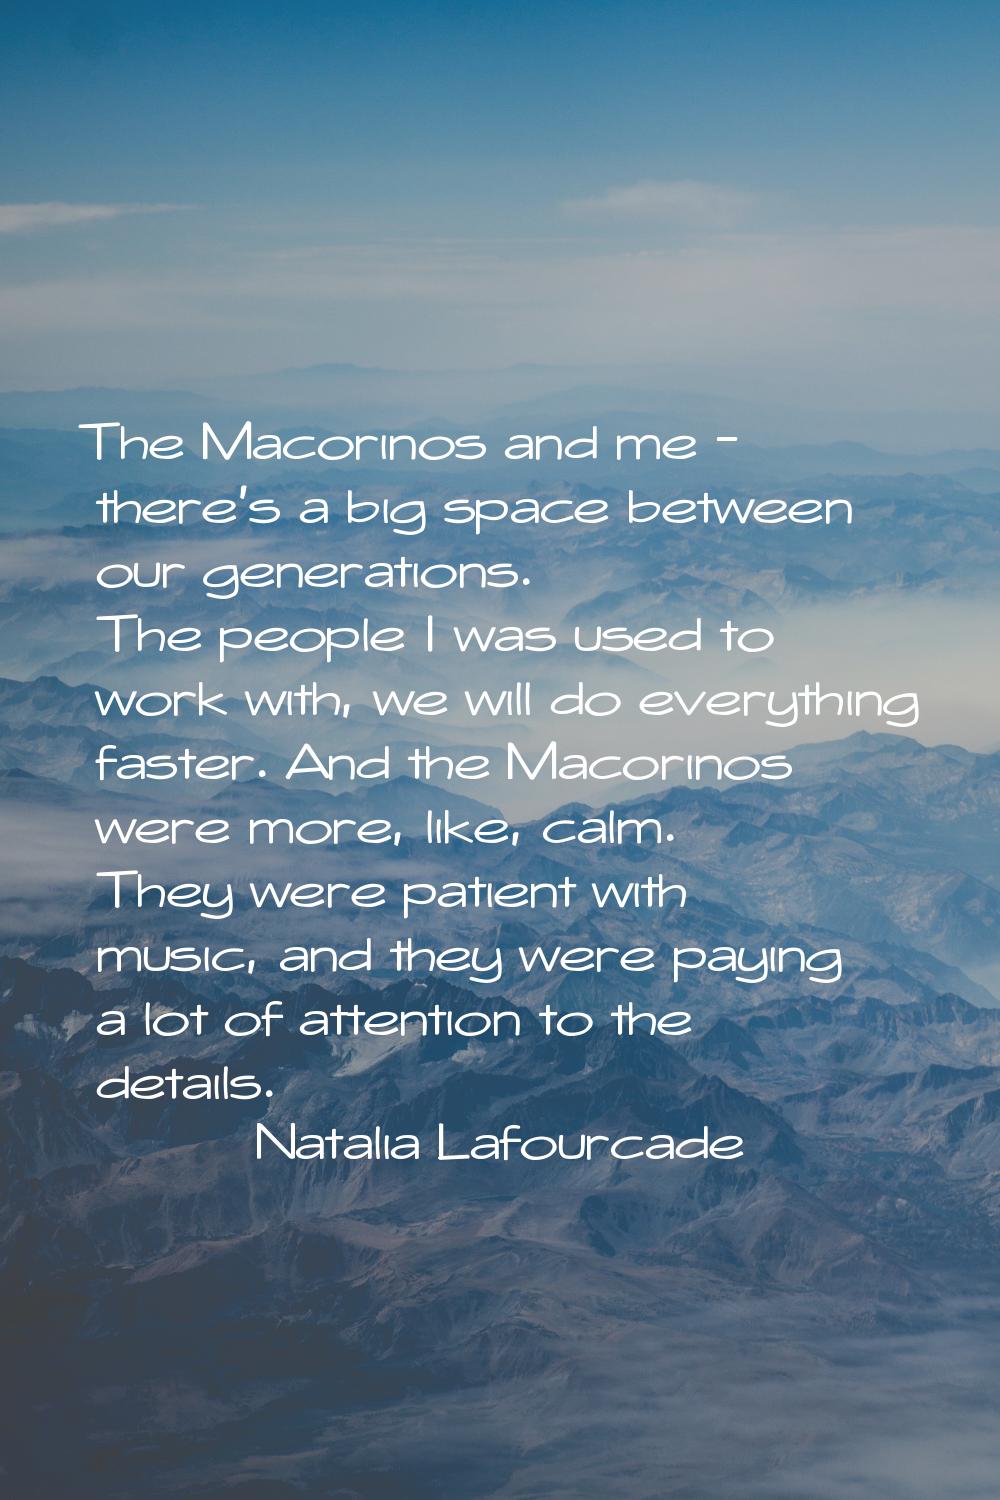 The Macorinos and me - there's a big space between our generations. The people I was used to work w